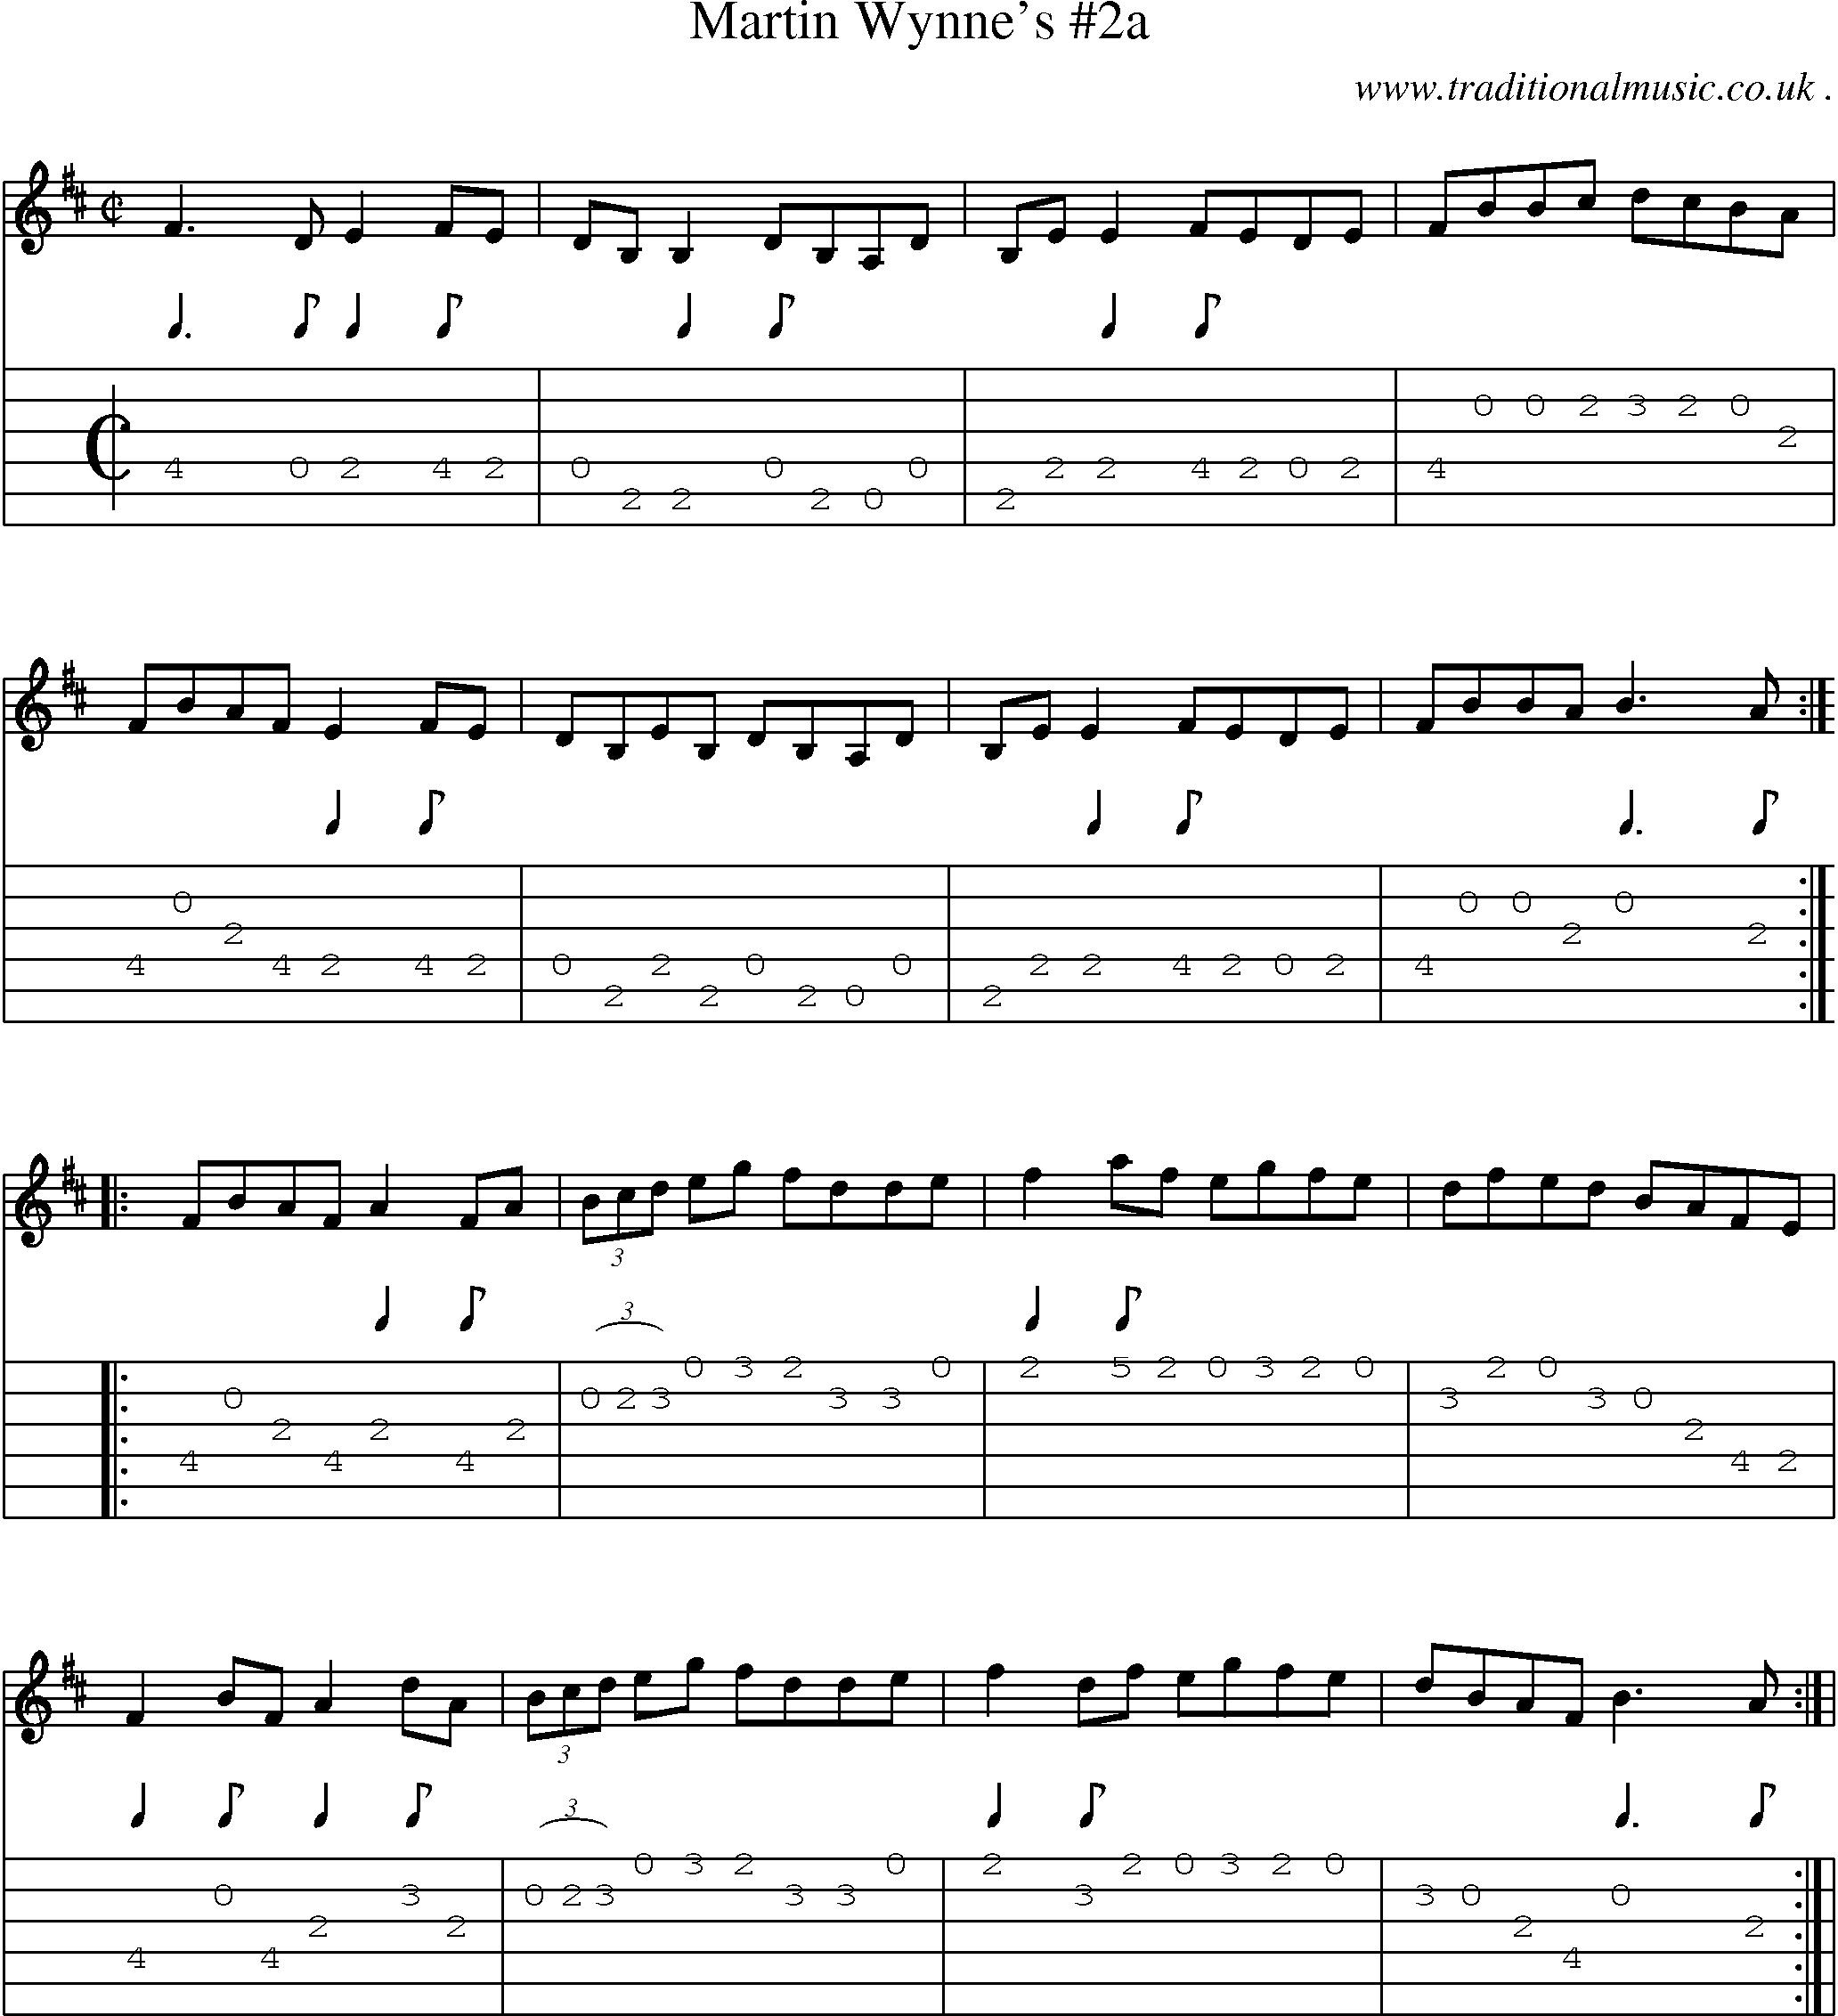 Sheet-Music and Guitar Tabs for Martin Wynnes 2a